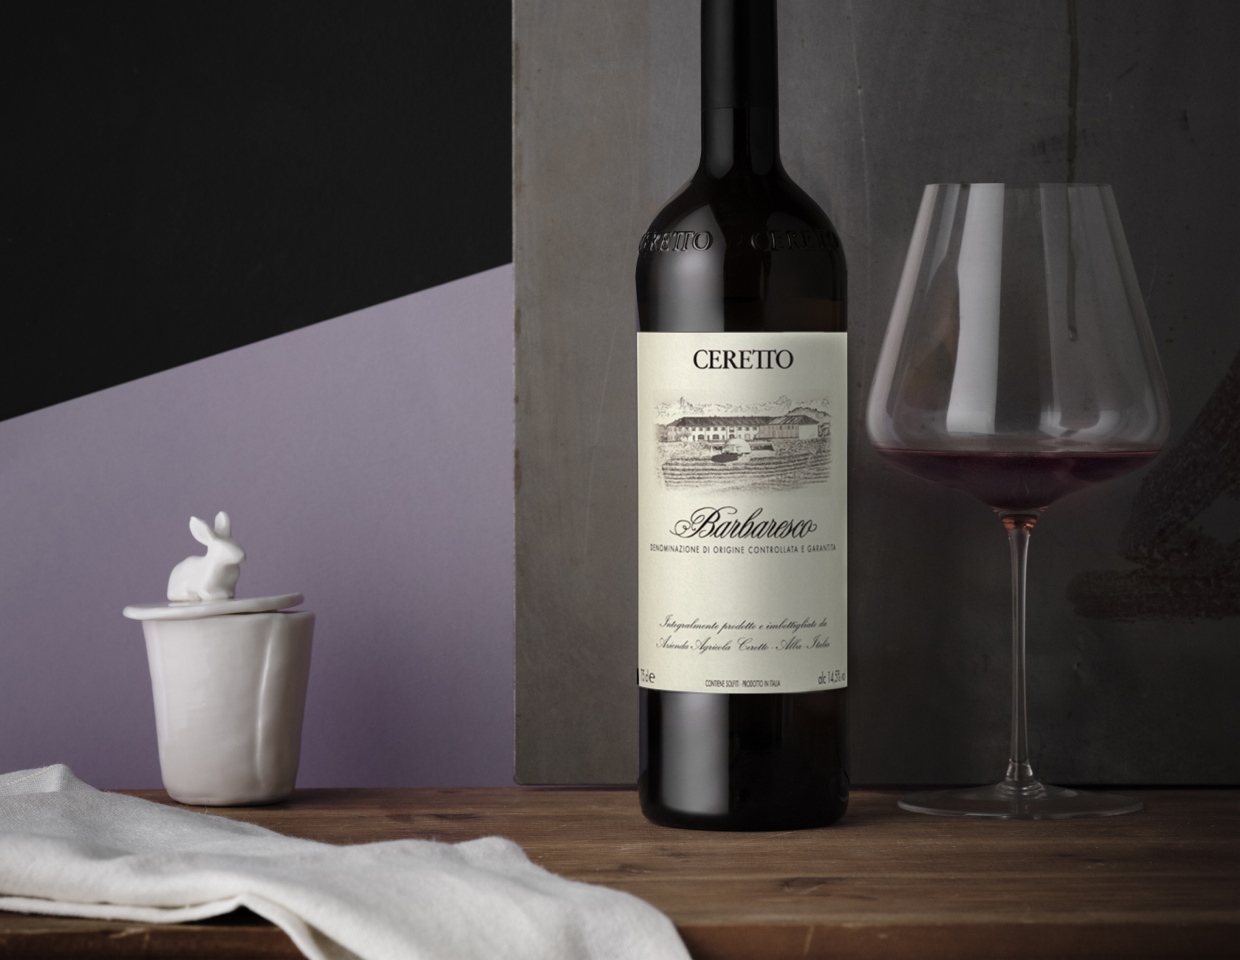 Bottle of Ceretto Barbaresco and glass of wine on wooden table in front of geometric wallpaper.